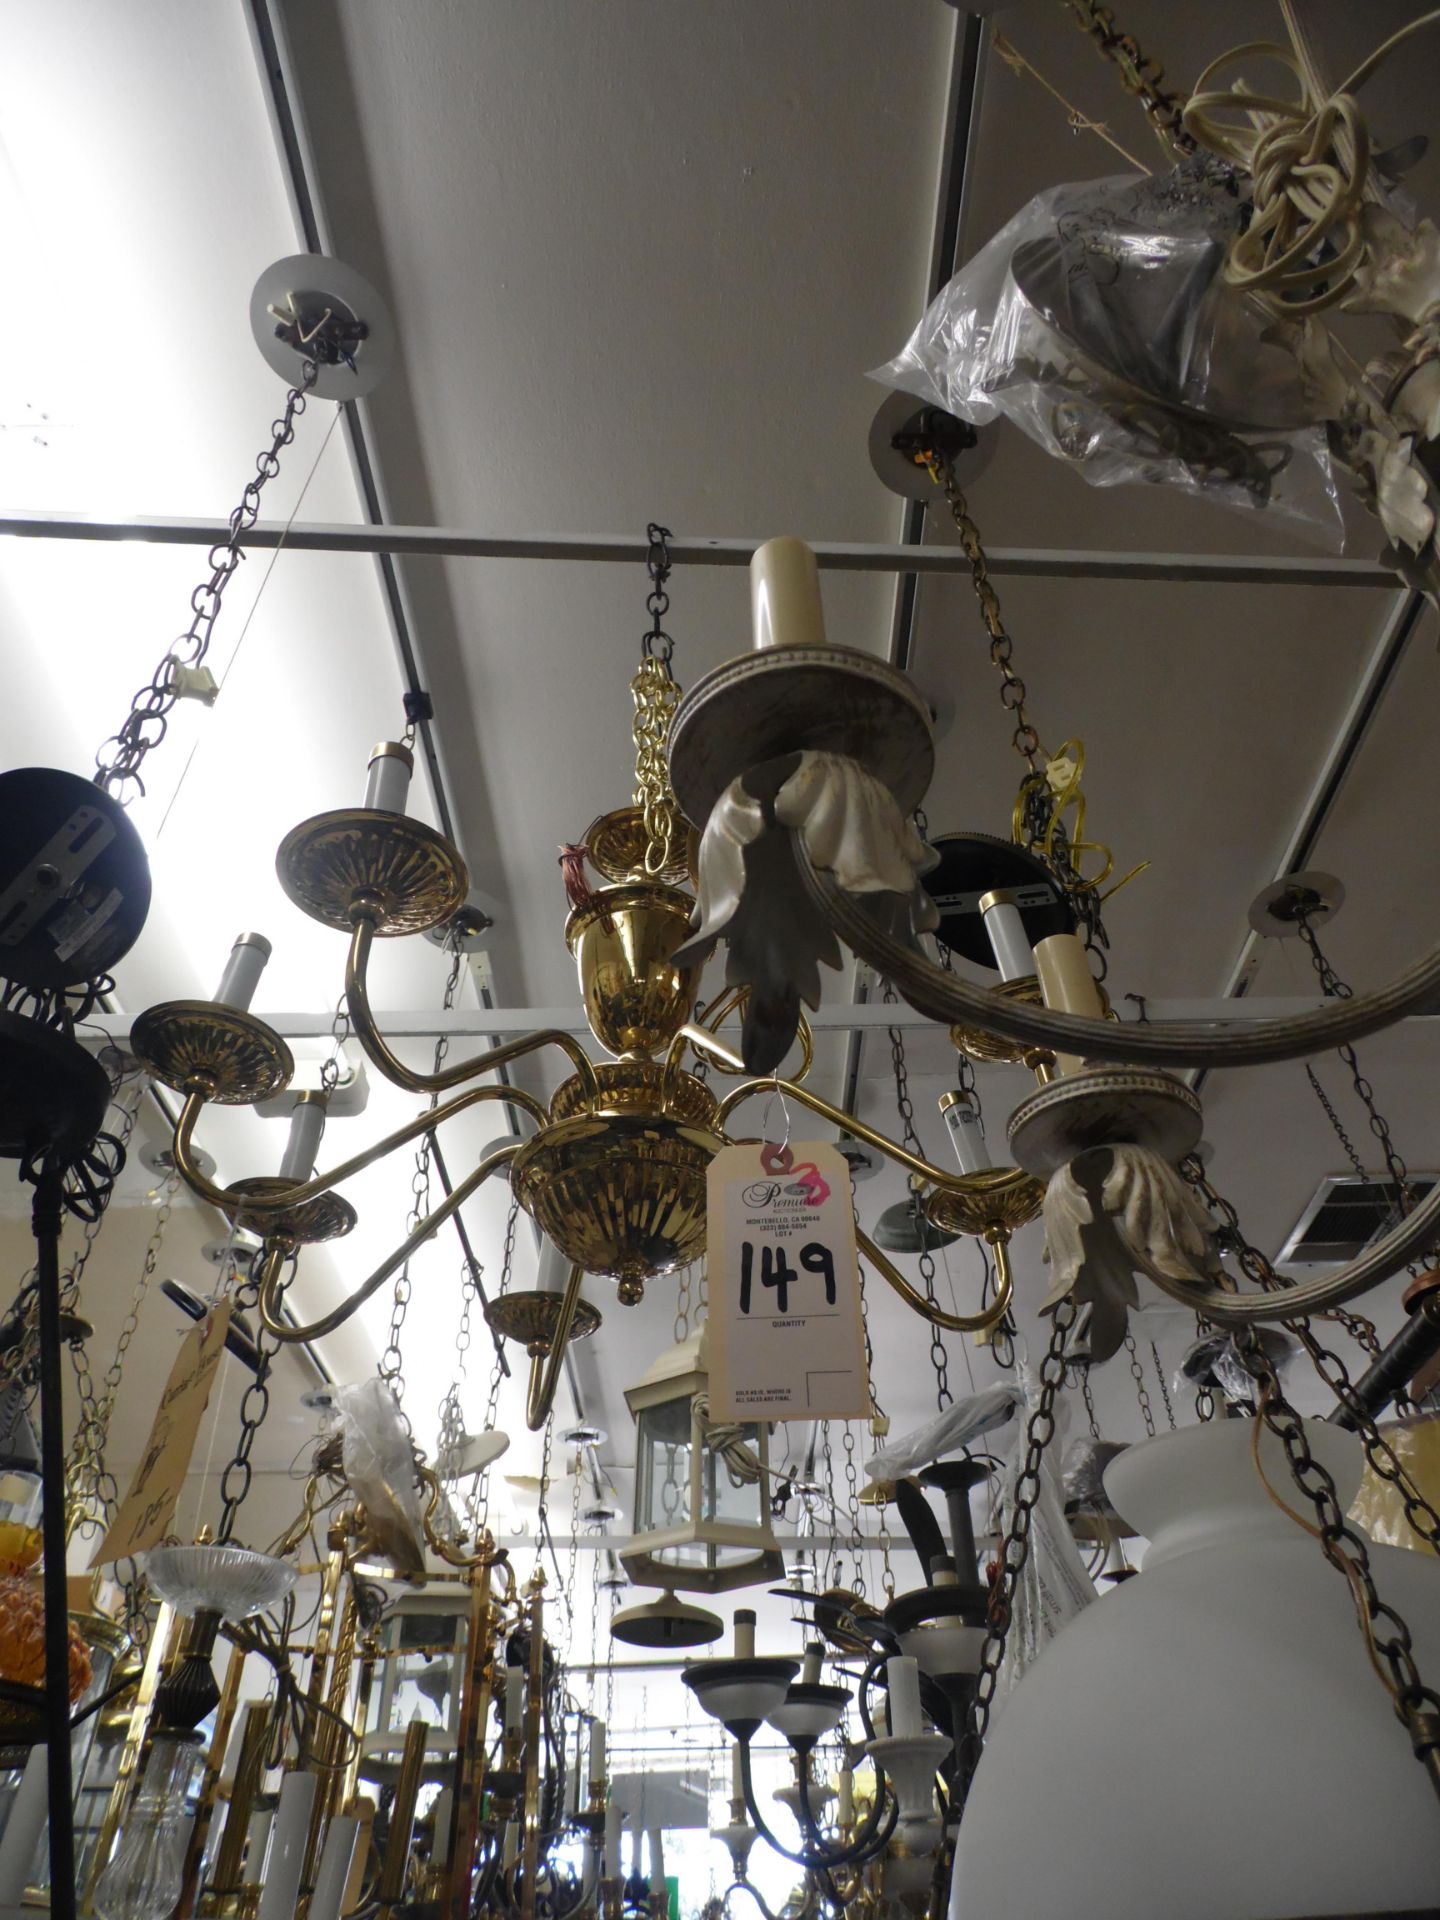 ASSORTED HANGING LIGHTS ON POLE